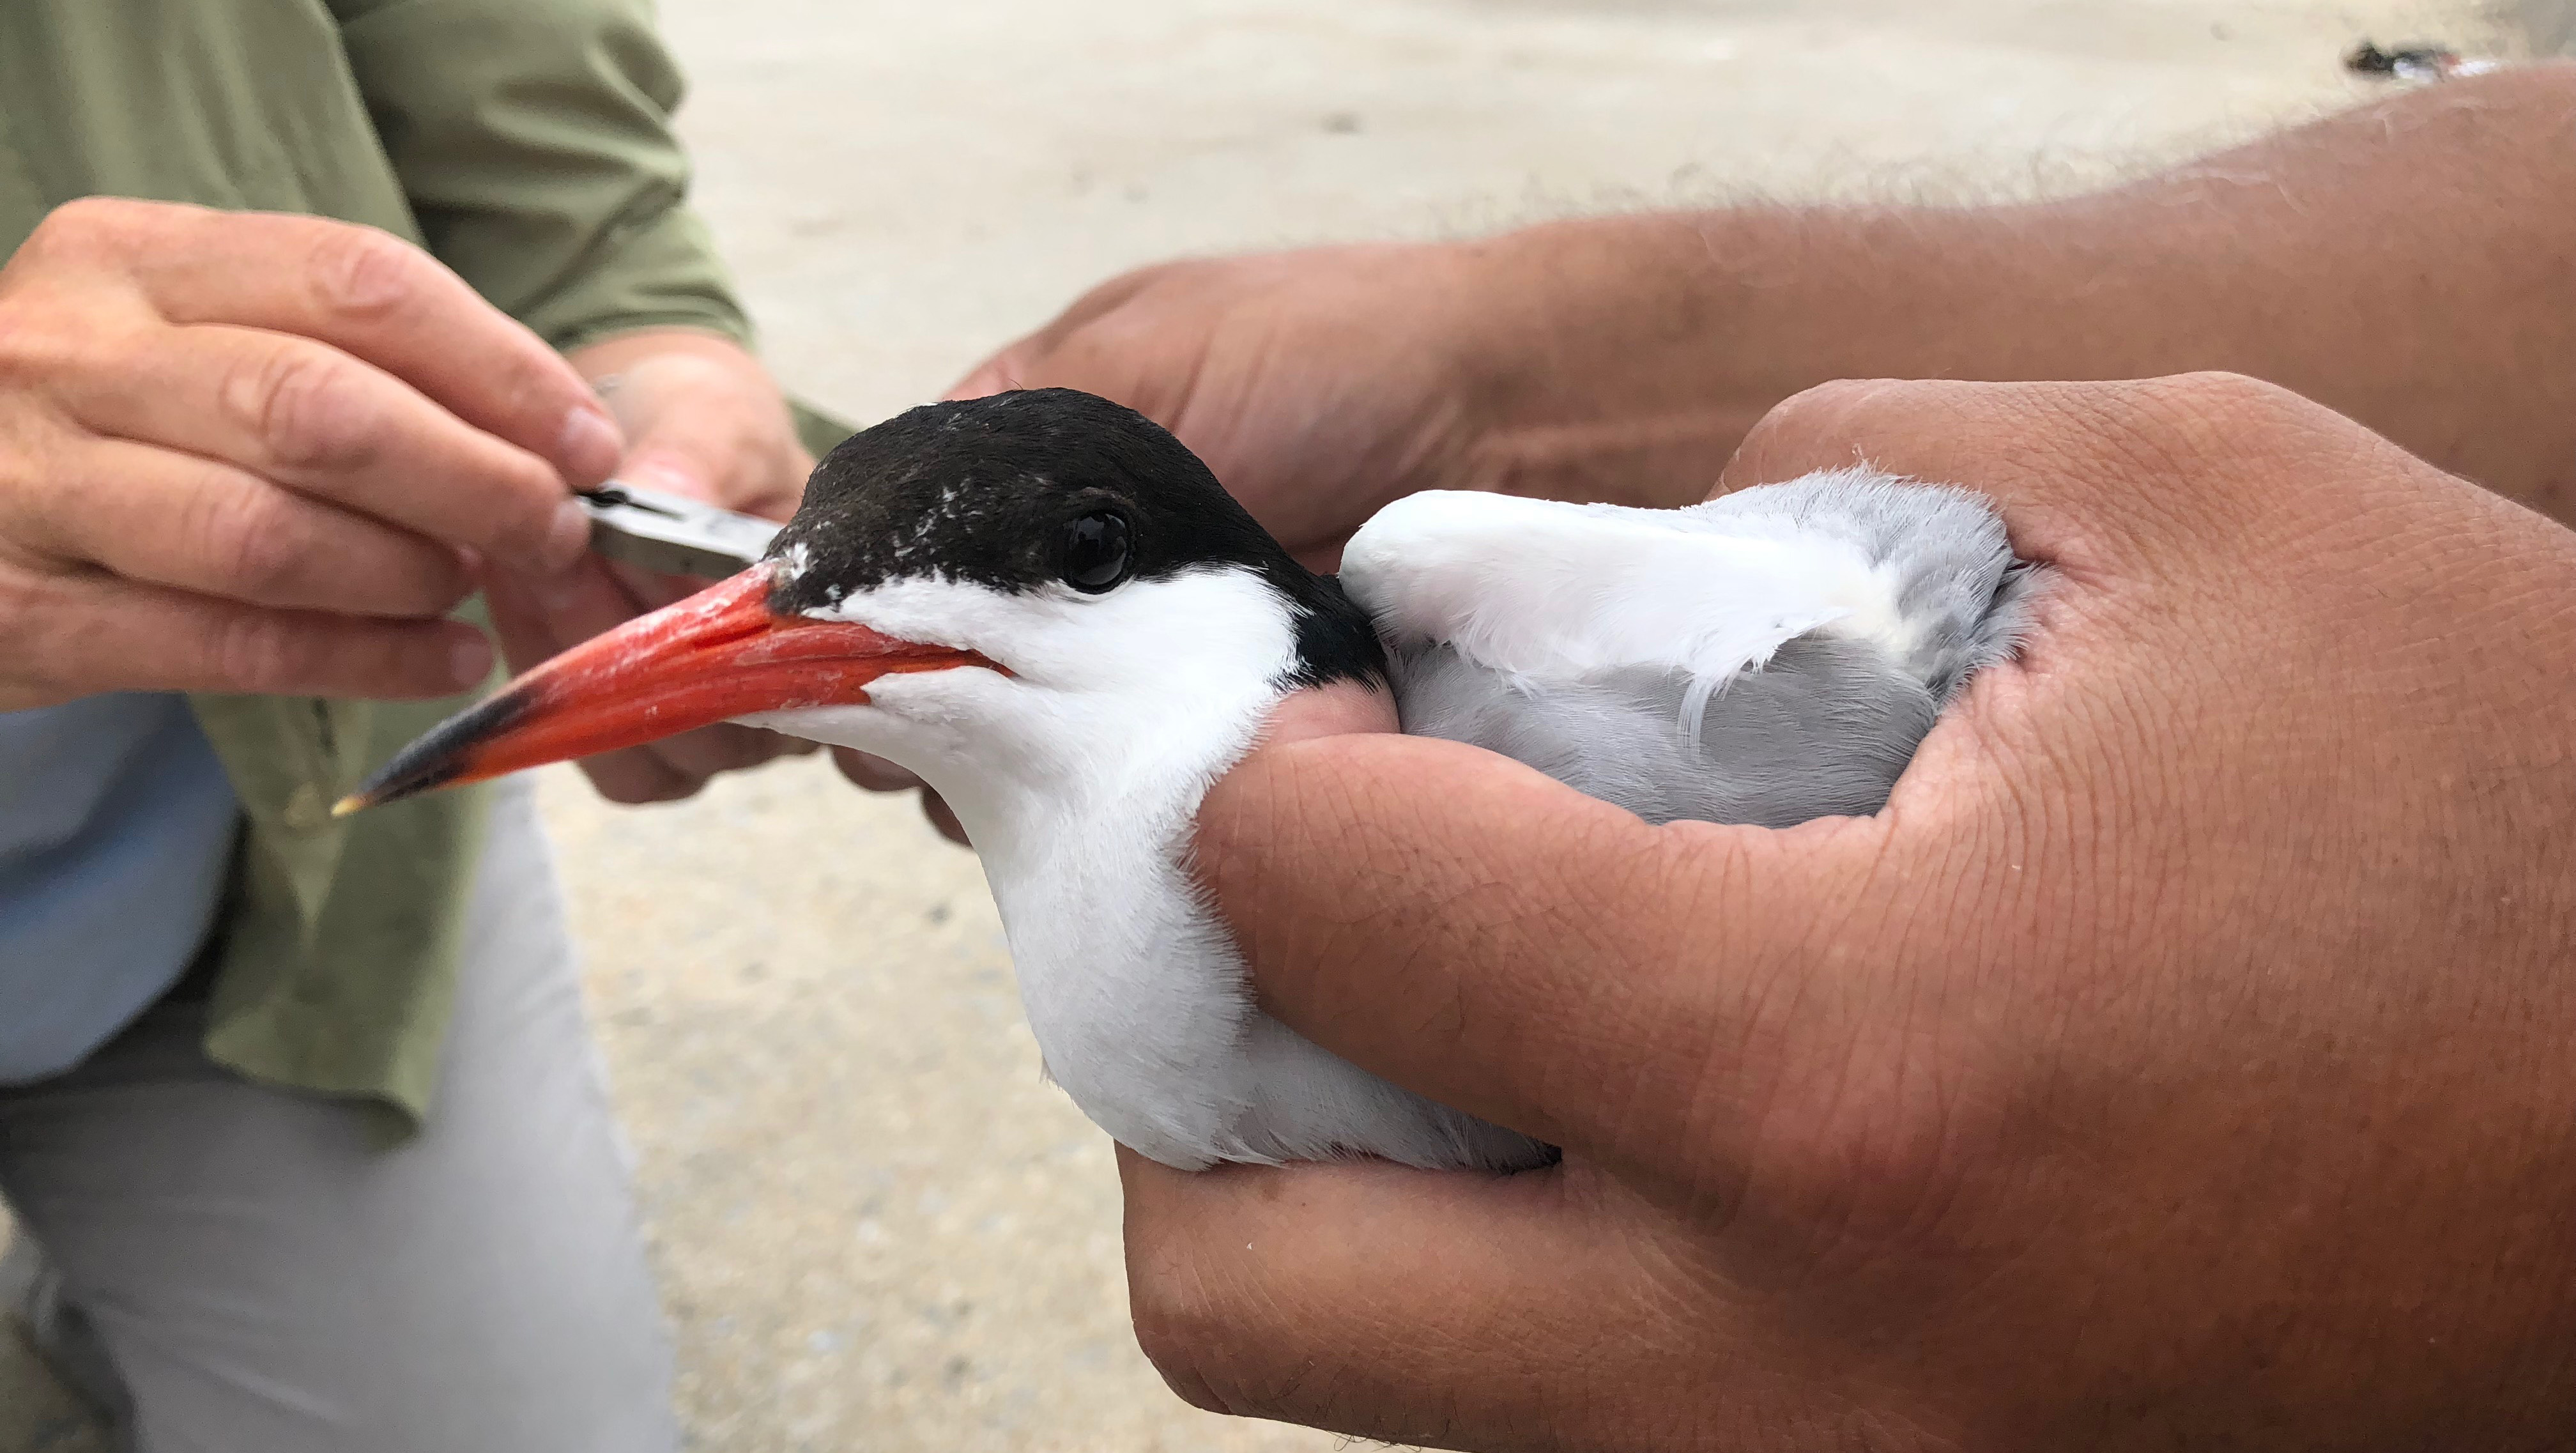 A Common Tern is measured before being fit with a geolocator tag. Common Terns are listed as Threatened in New York State. Photo: NYC Audubon